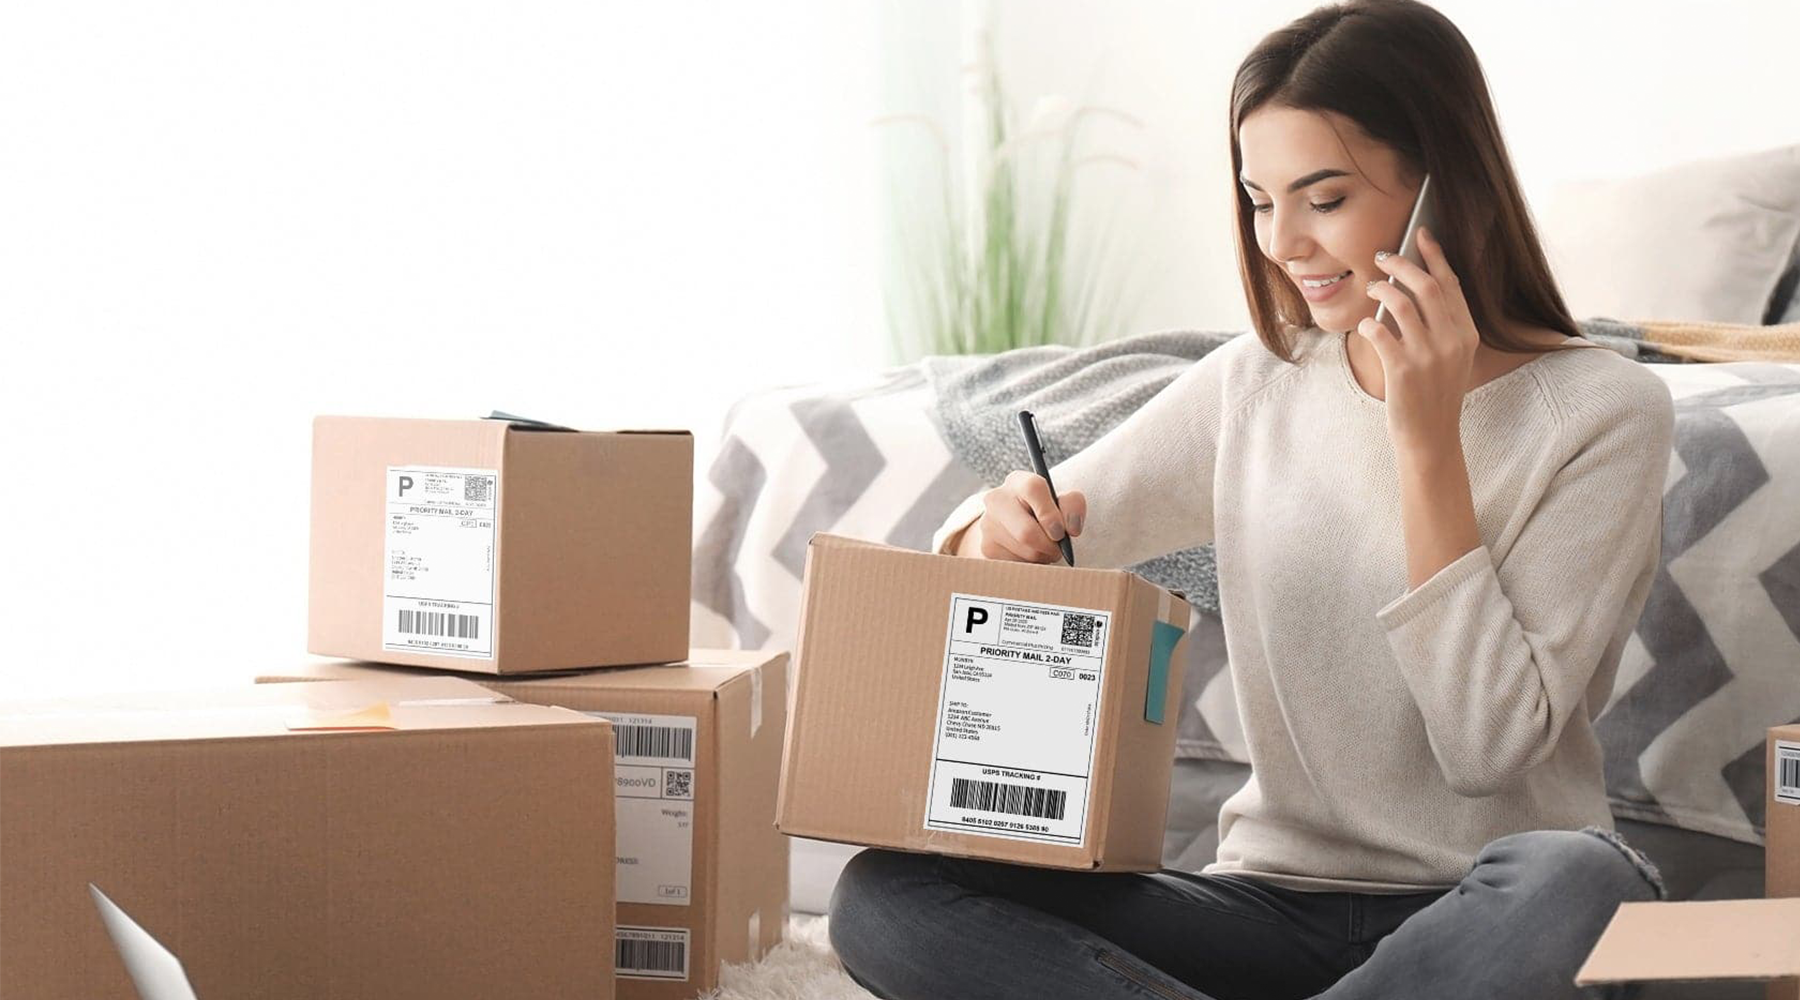 Cheapest Ways to Print Shipping Labels as a Small Business